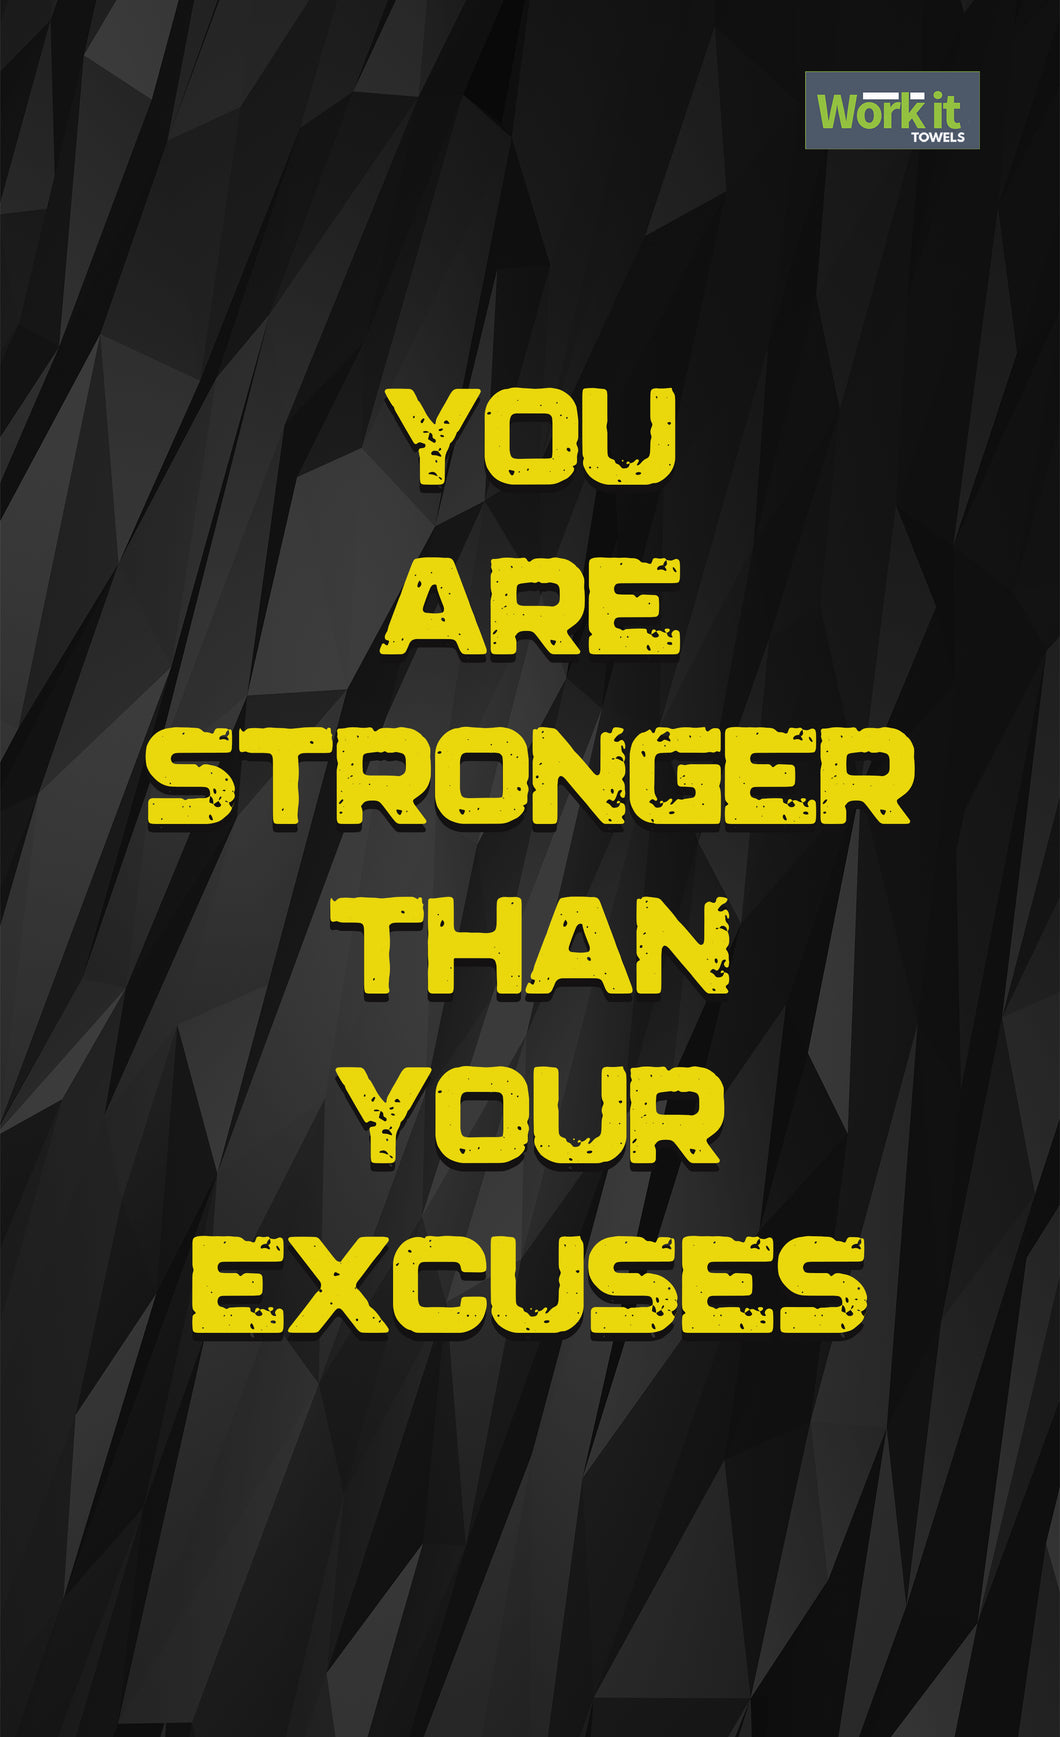 Stronger Than Your Excuses - work it towels